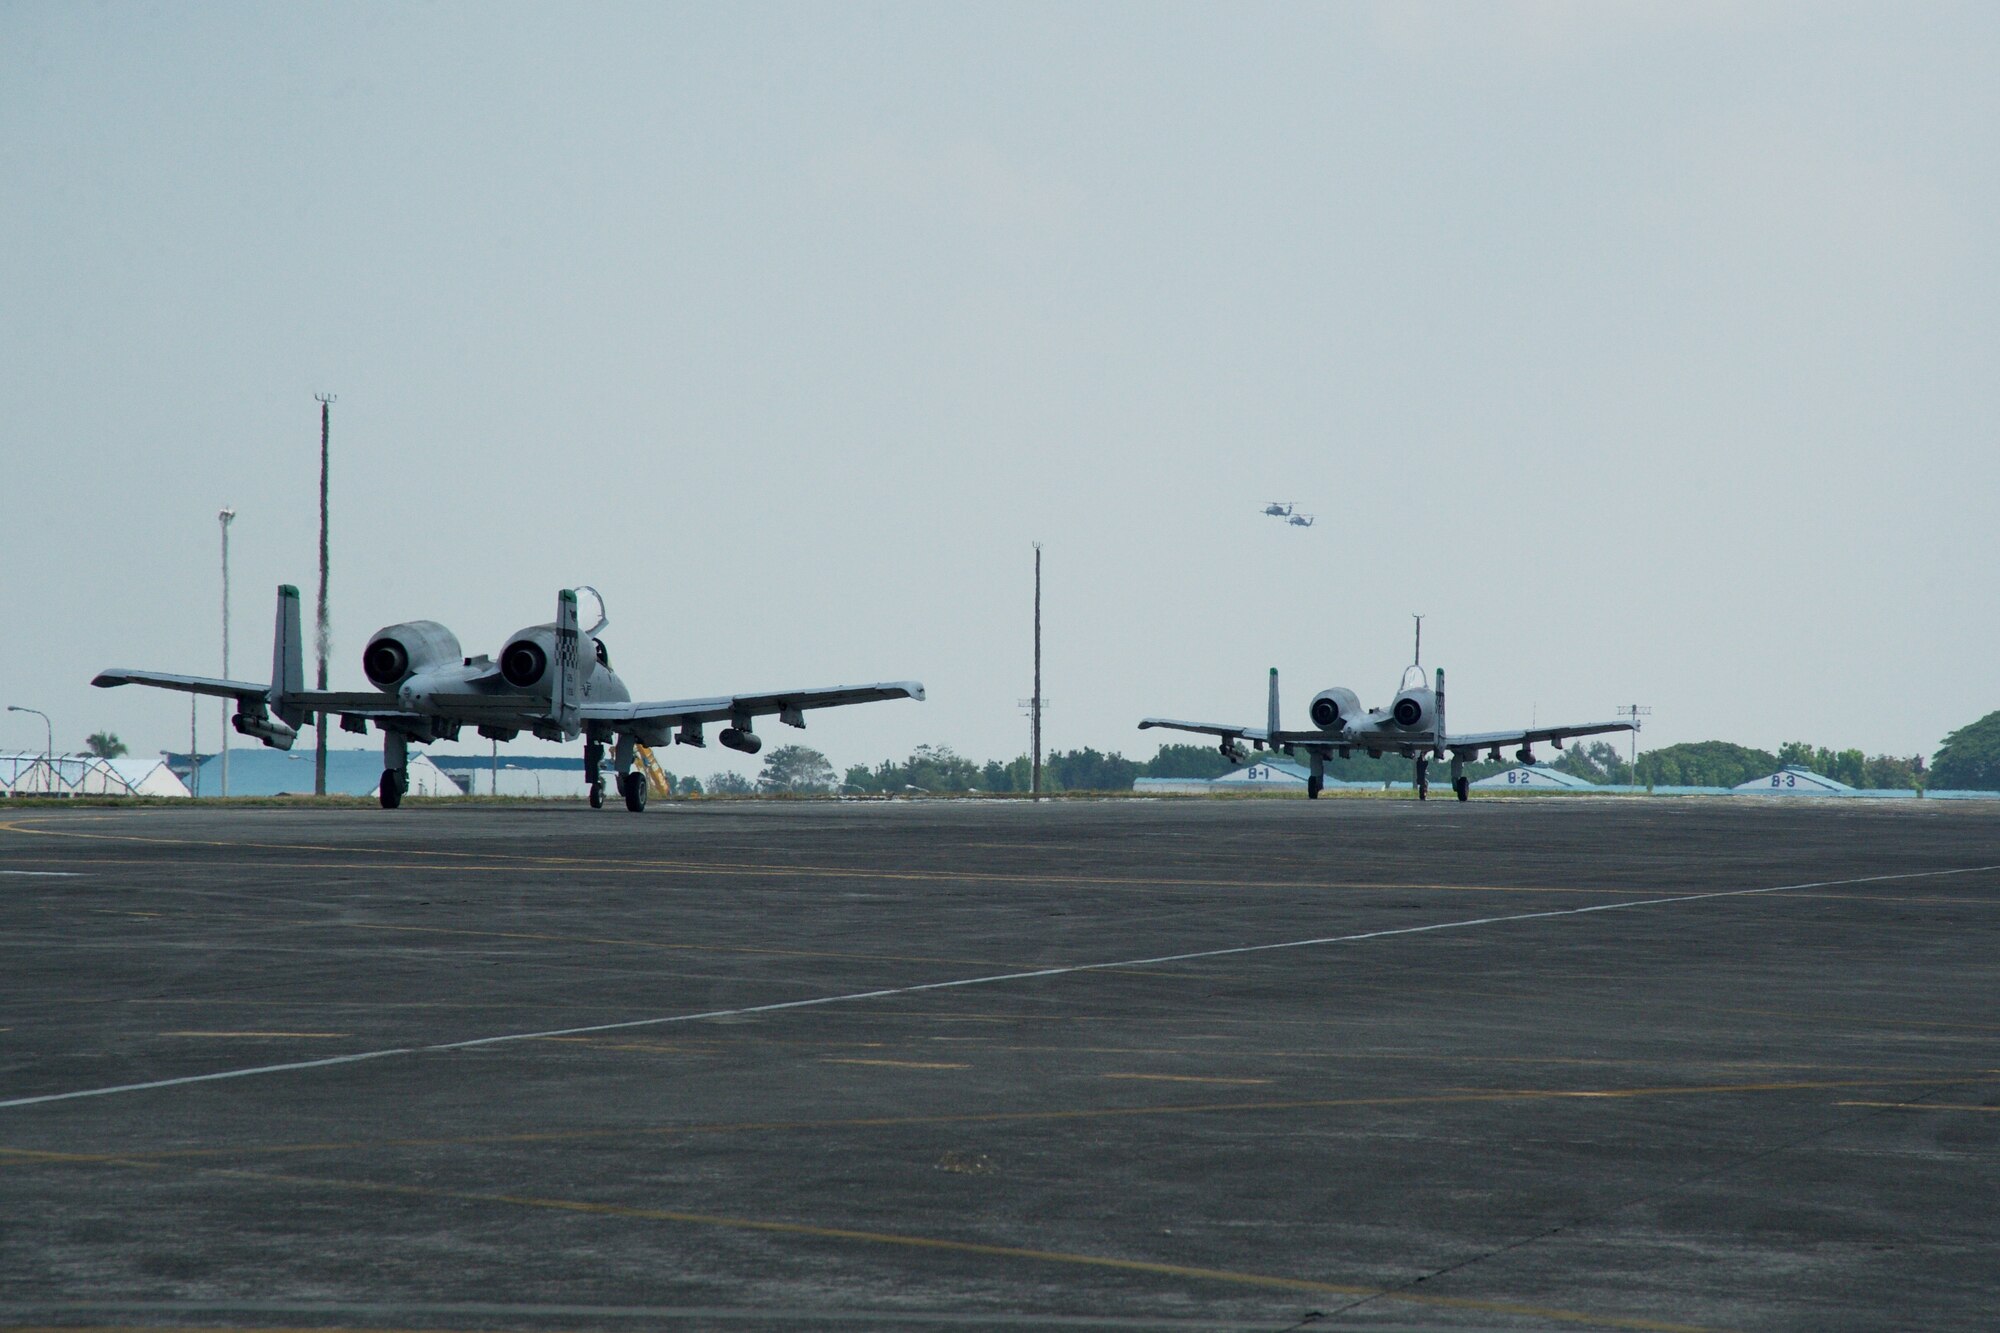 Two U.S. Air Force A-10C Thunderbolt II 
aircraft and two HH-60G Pave Hawks arrive at Clark Air Base, Philippines after conducting and supporting the final U.S. Pacific Command Air Contingent air and maritime domain awareness mission April 28, 2016. The A-10s flew in international waters west of the Philippines, providing greater and more transparent air and maritime situational awareness to ensure safety for military and civilian activities in international waters and airspace. While the A-10s are flying, the HH-60s are aloft off the Philippine coast, ensuring they are available to provide personnel recovery support in the event one of the A-10s experienced a problem. (U.S. Air Force photo by Capt. Susan Harrington)
